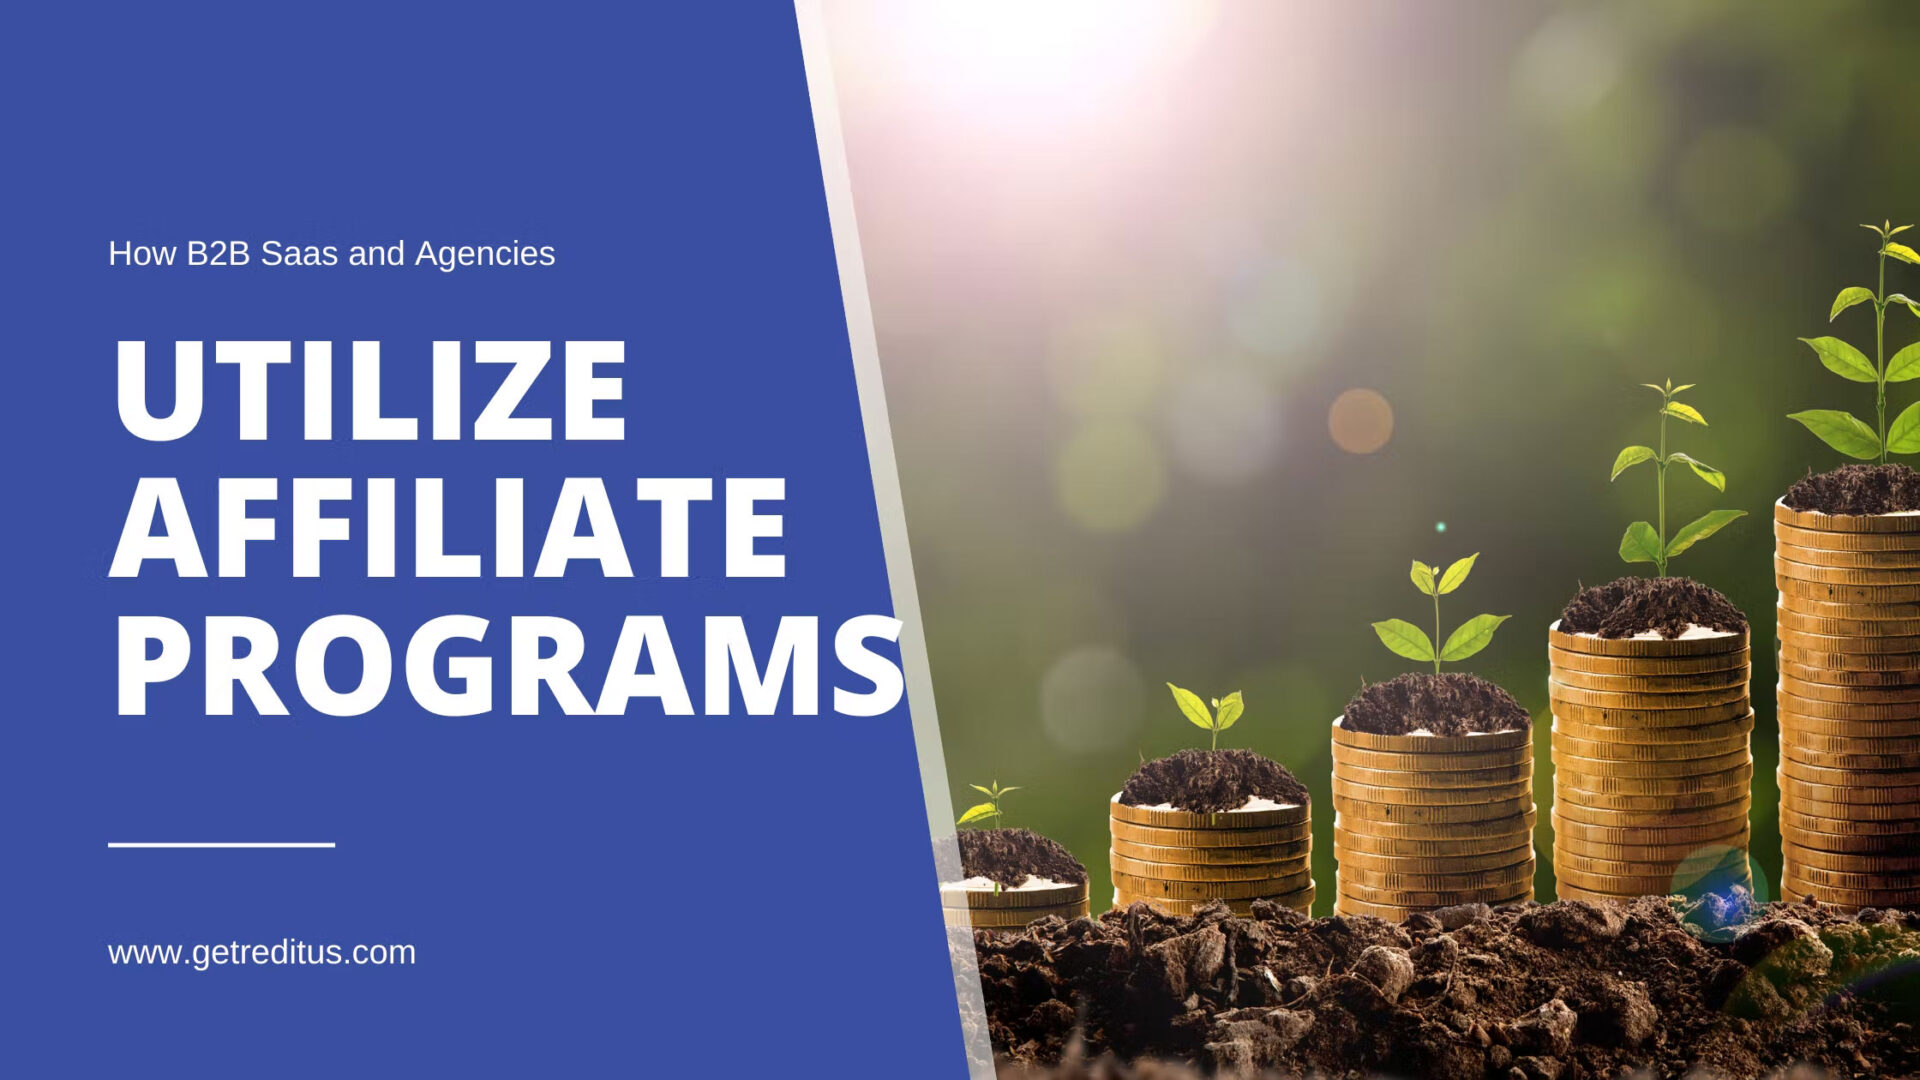 How B2B SaaS and Agencies Utilize Affiliate Programs